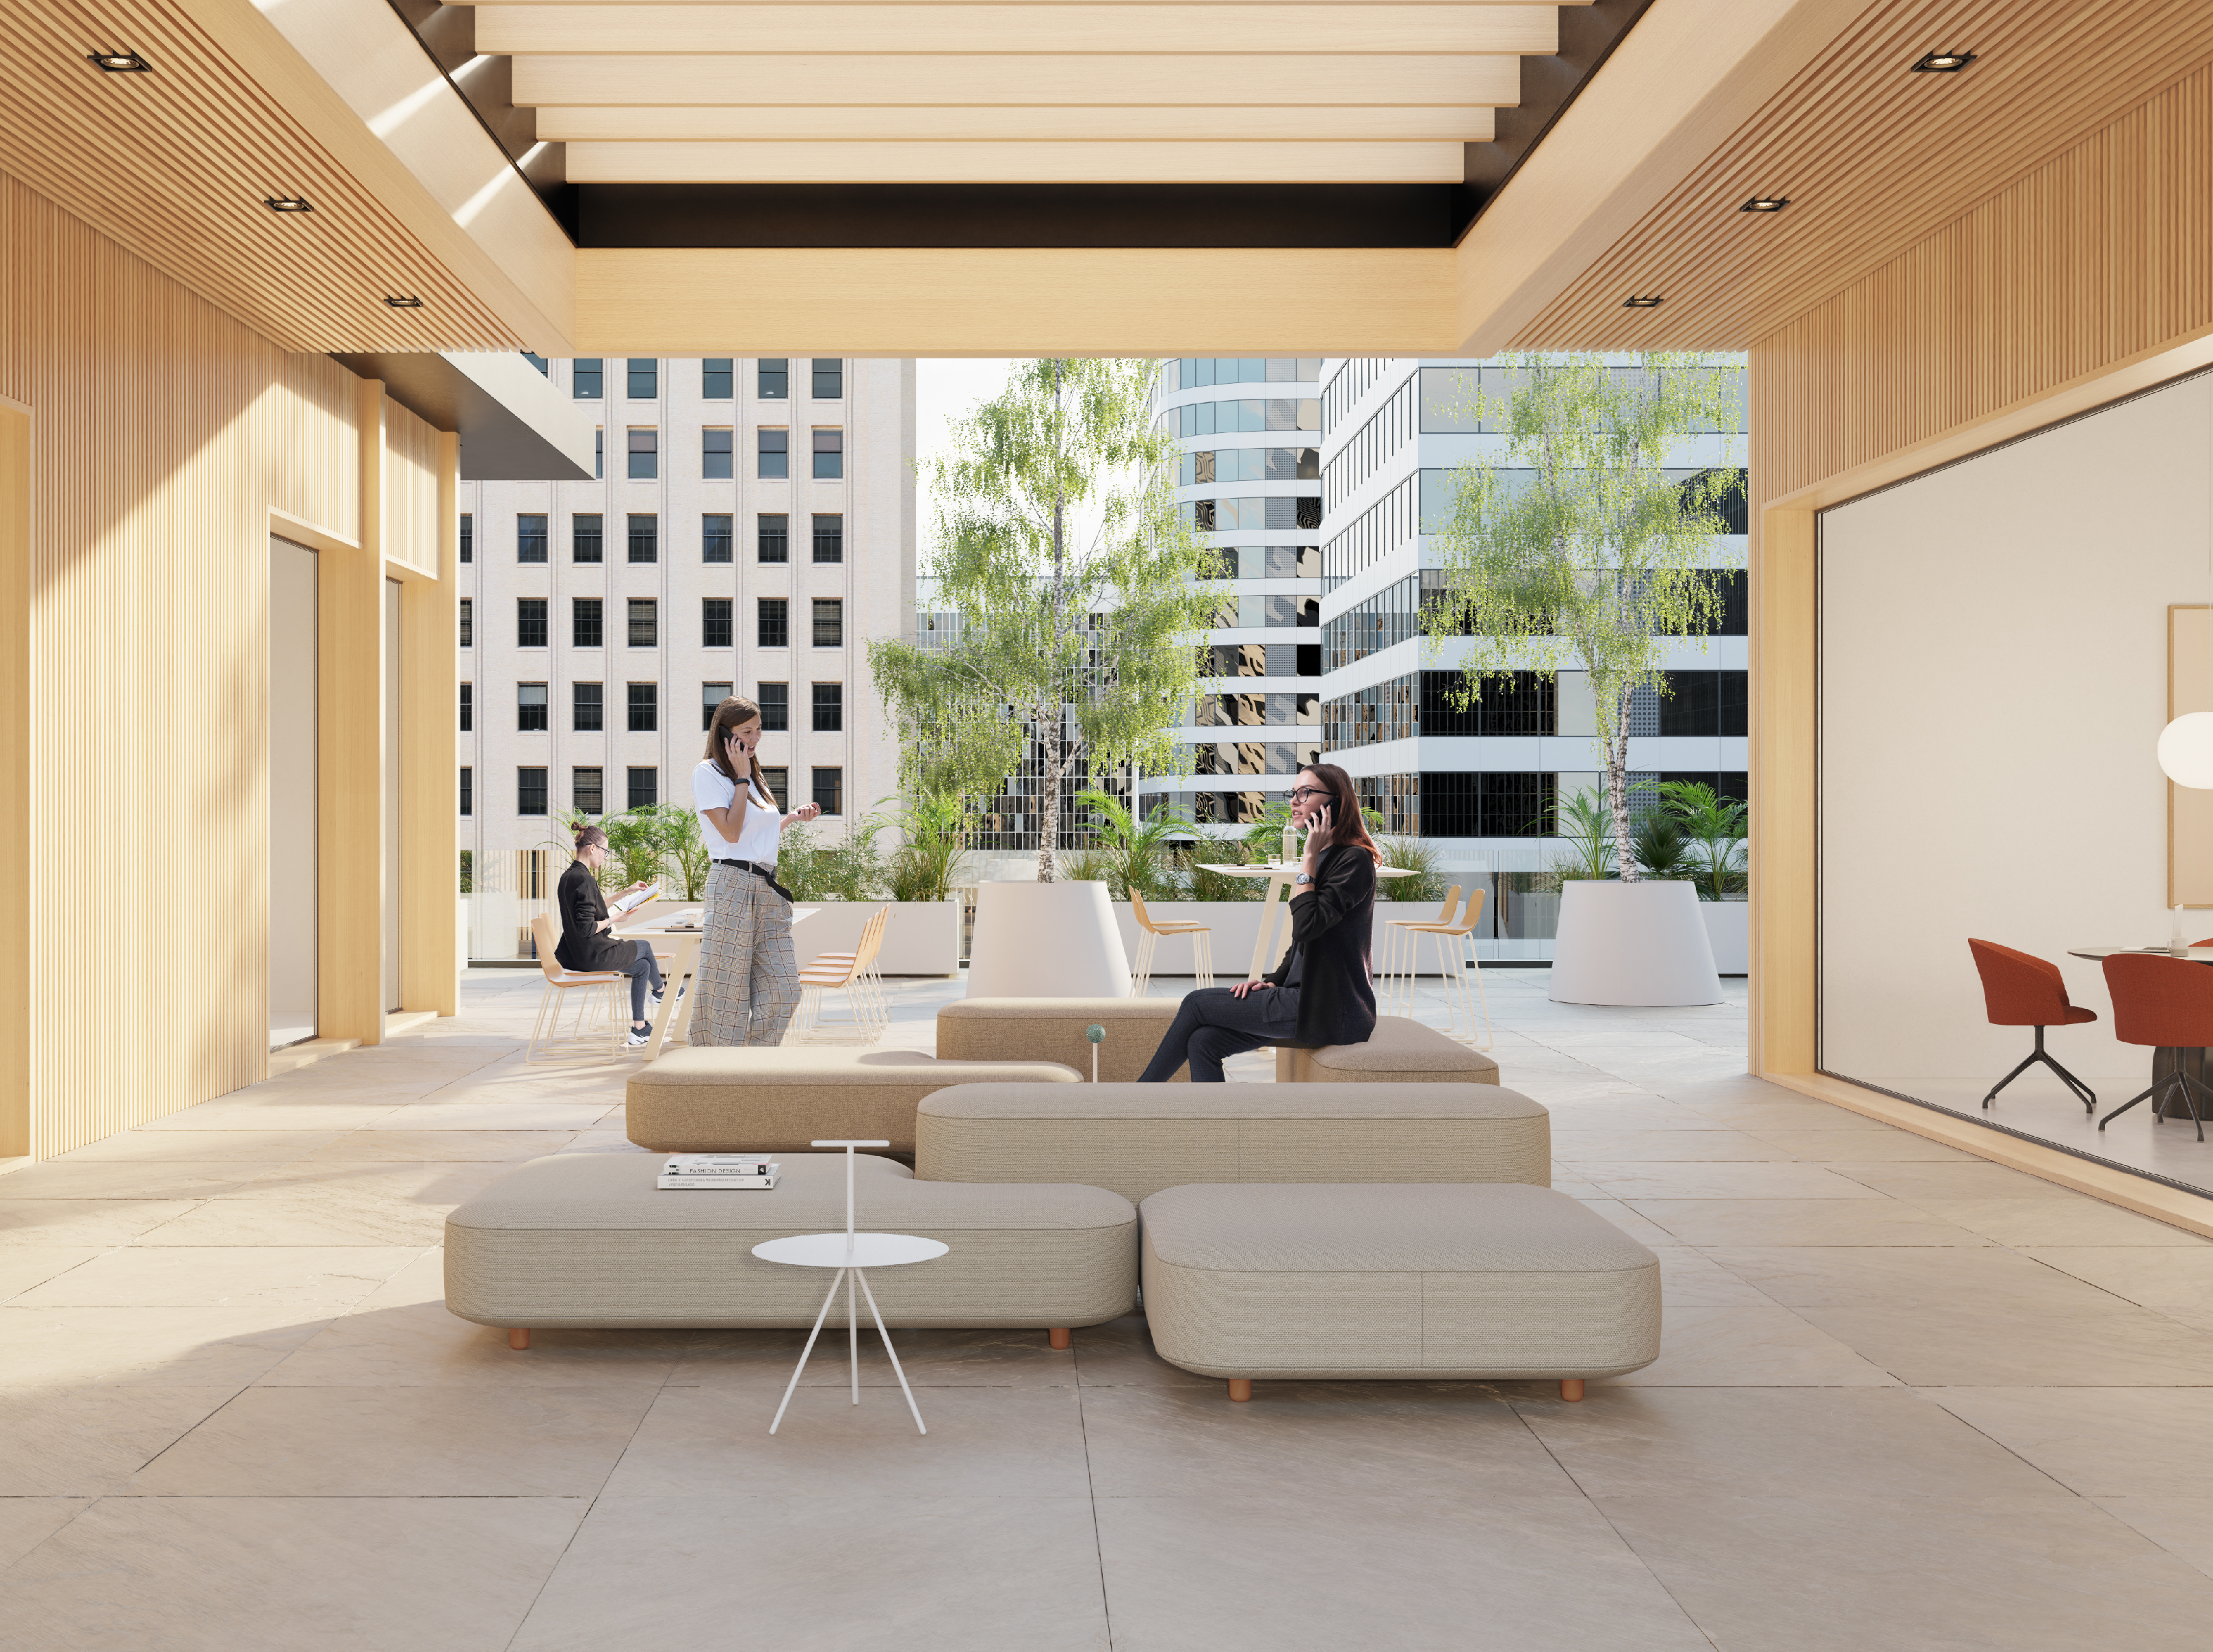 Nature and design for collaborative offices that look outwards